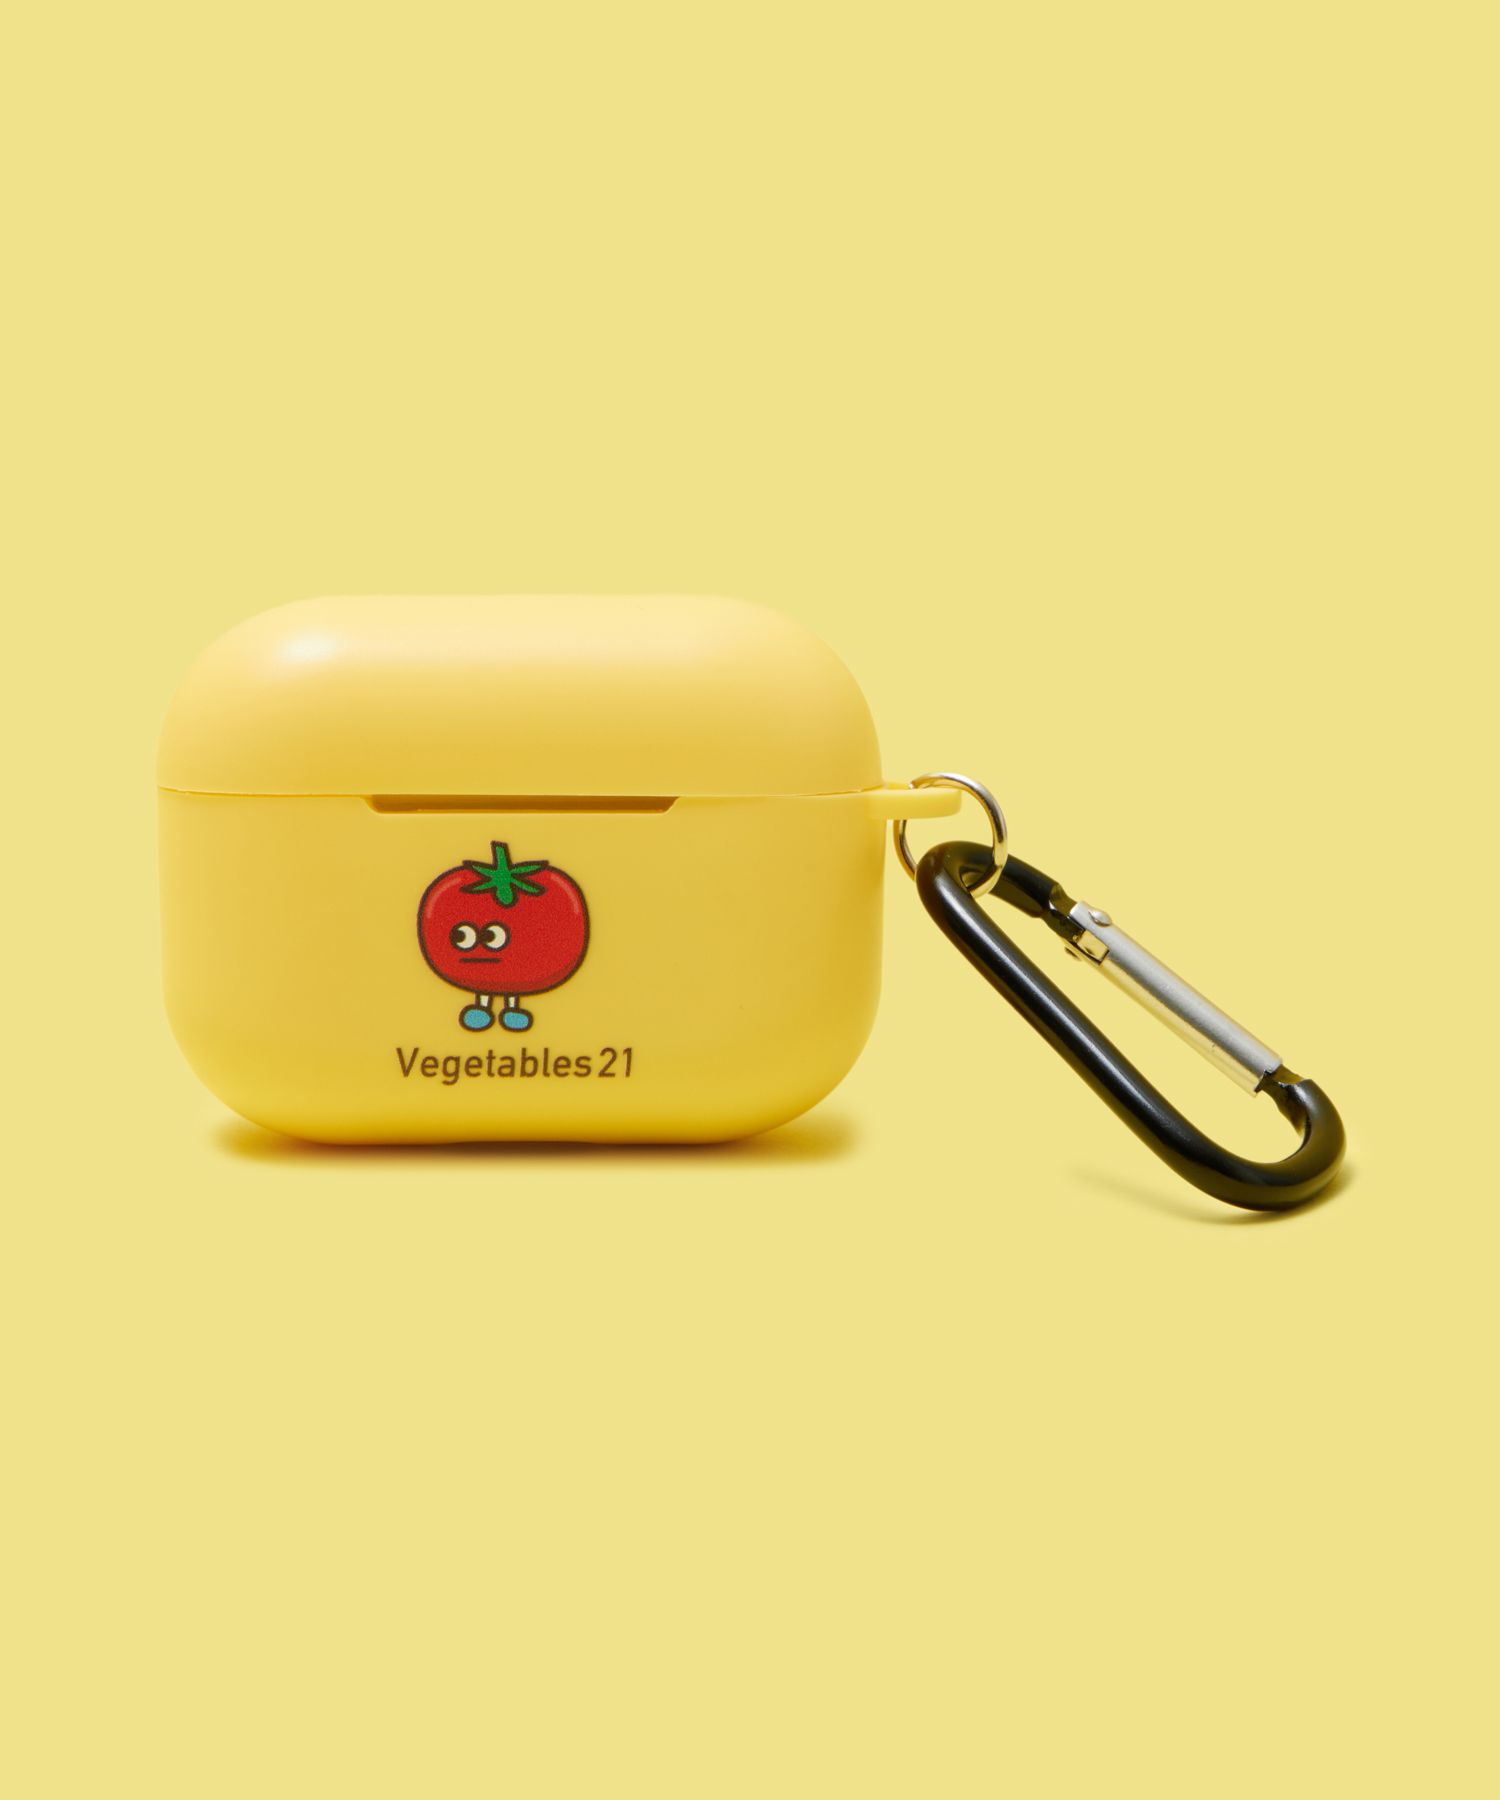 Airpods Pro】Vegetable21ケース [公式]フォーエバートゥエンティワン（FOREVER 21）通販